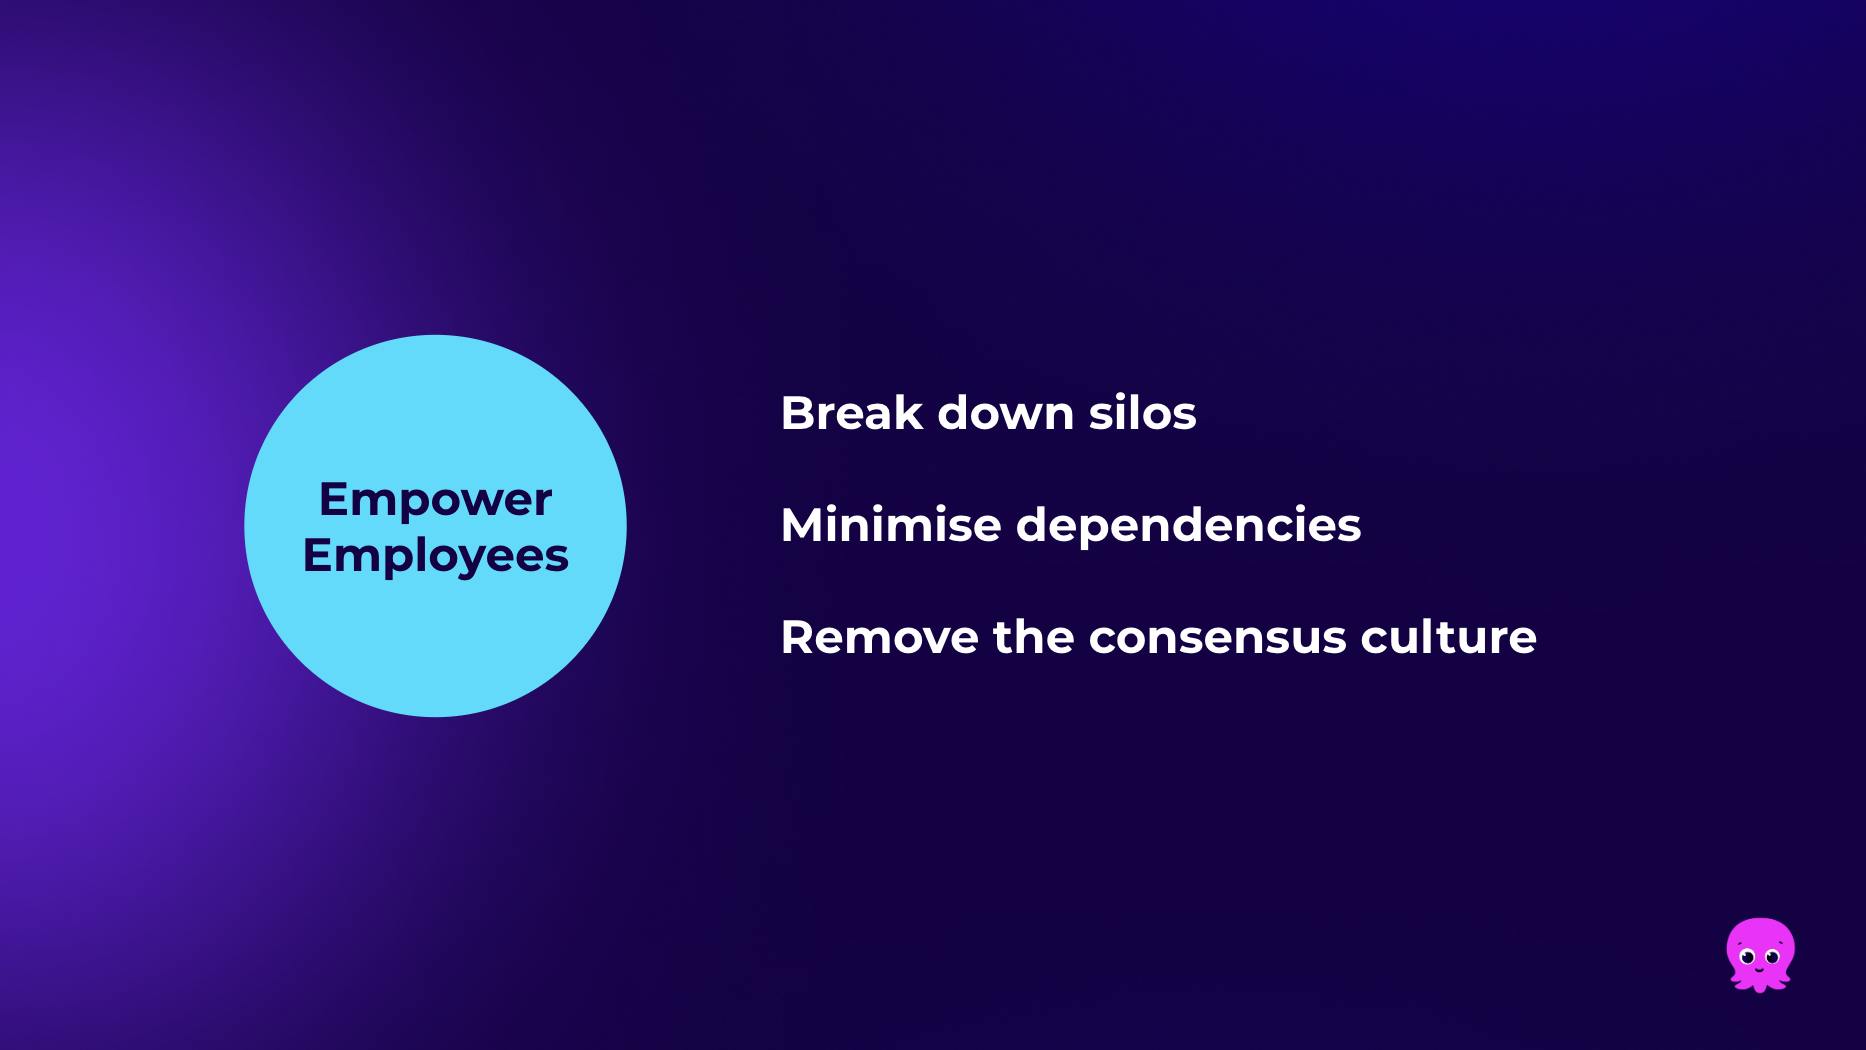 Empower employees: Break down silos, Minimise dependencies, Remove the consensus culture